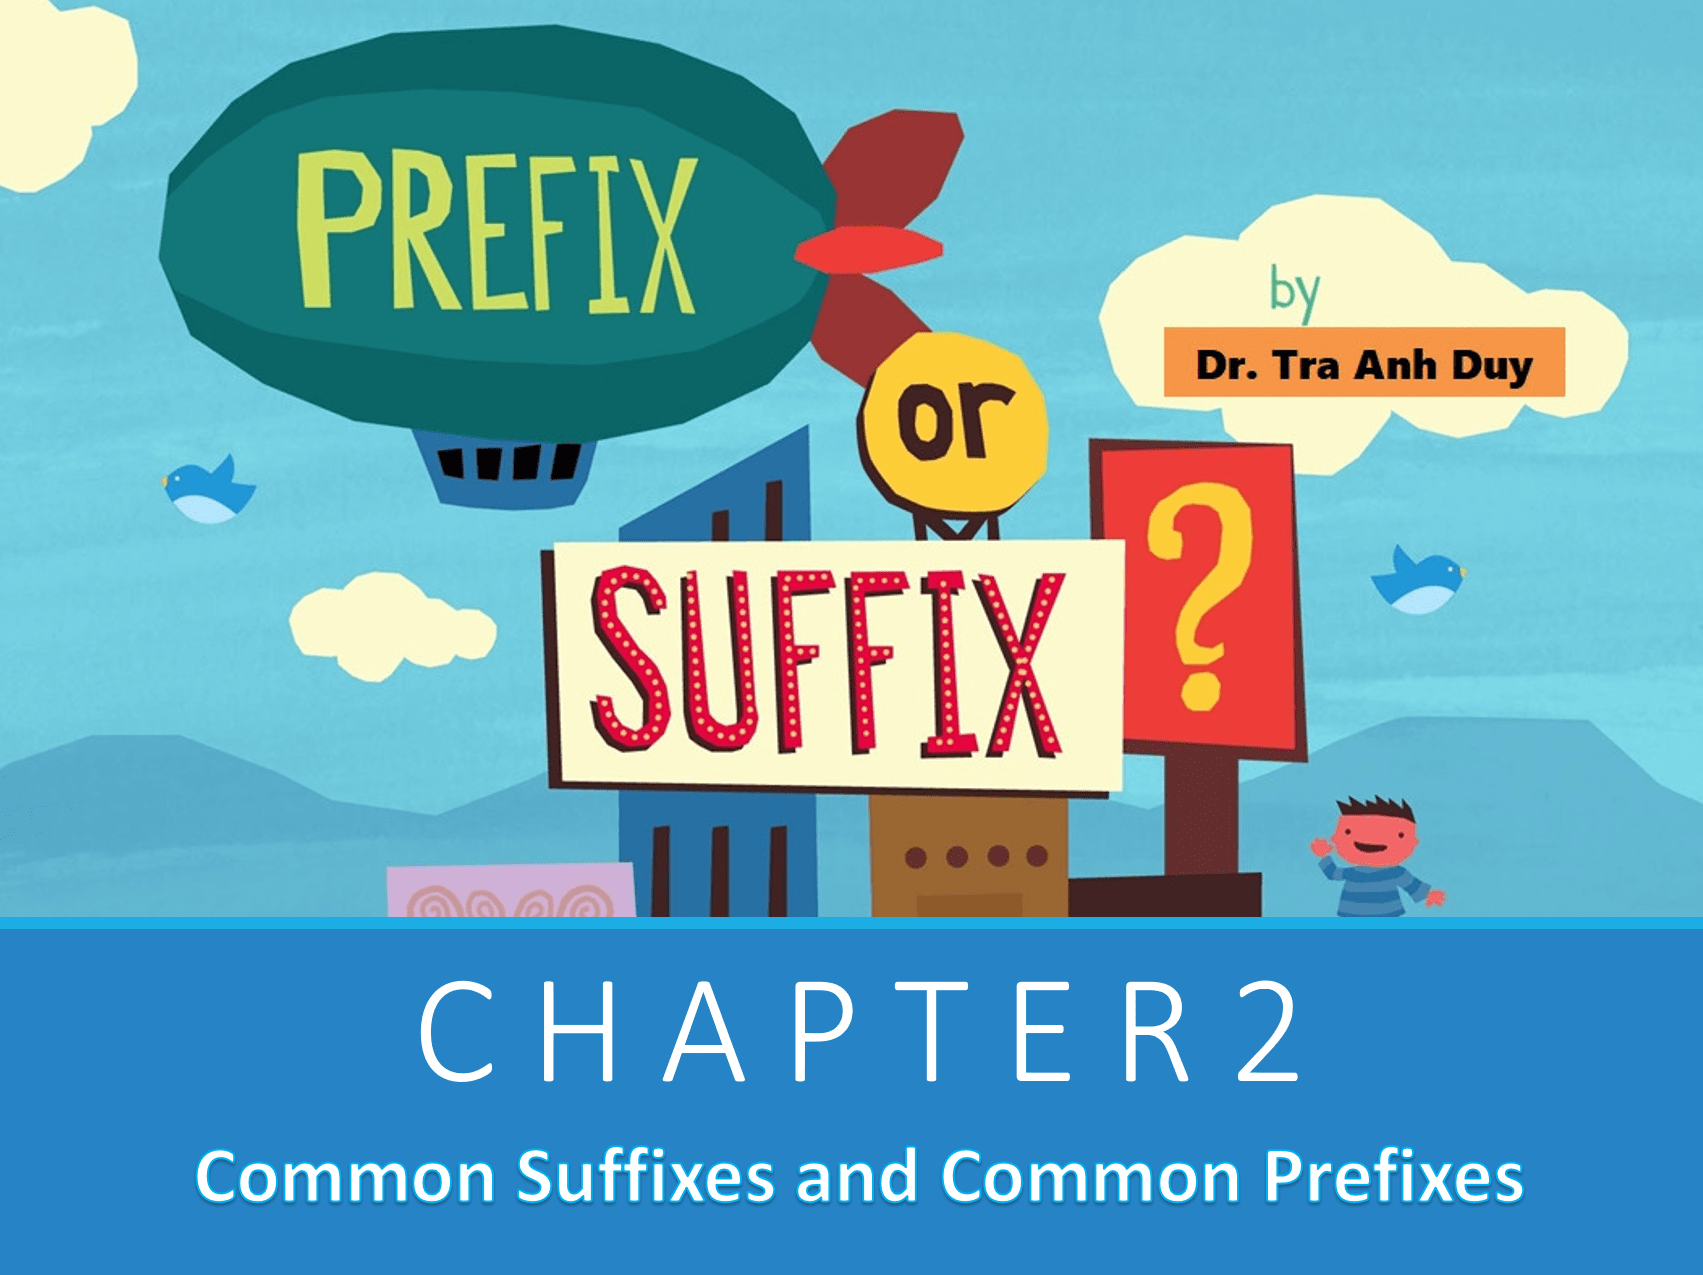 Chapter 2: Common Suffixes and Common Prefixes